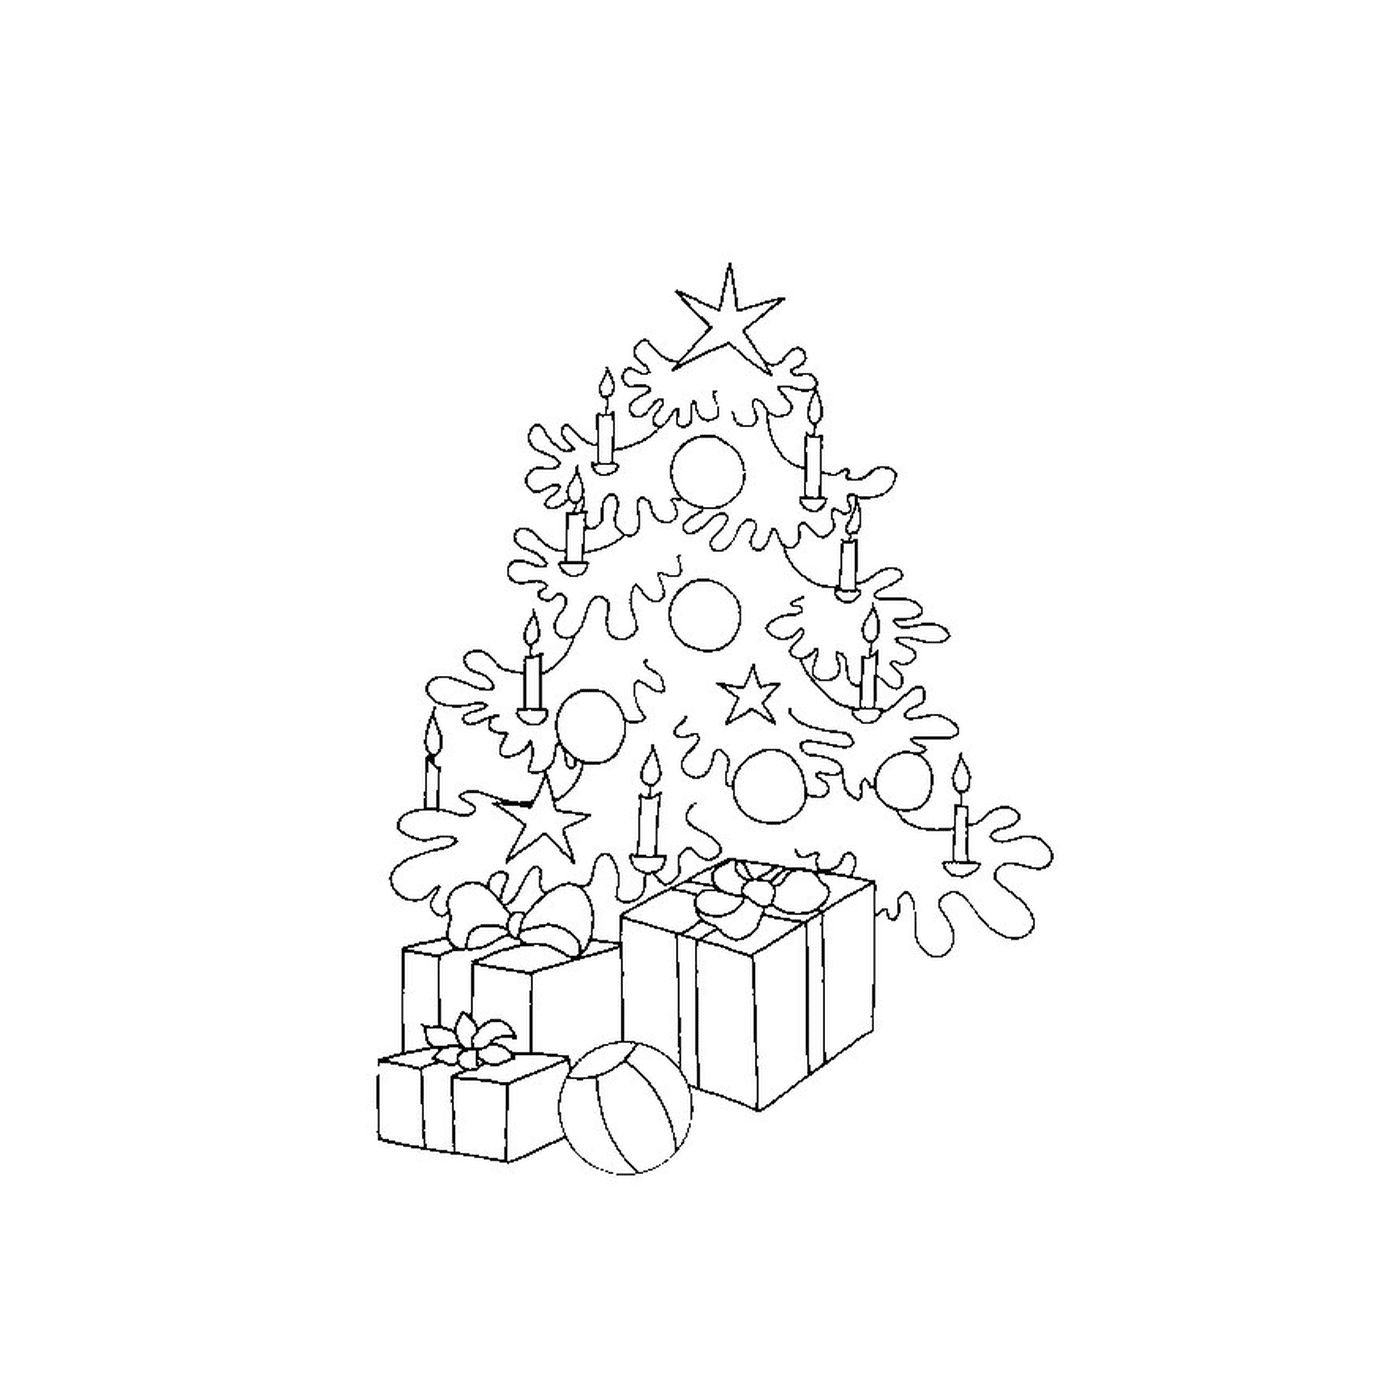  A Christmas tree and presents 